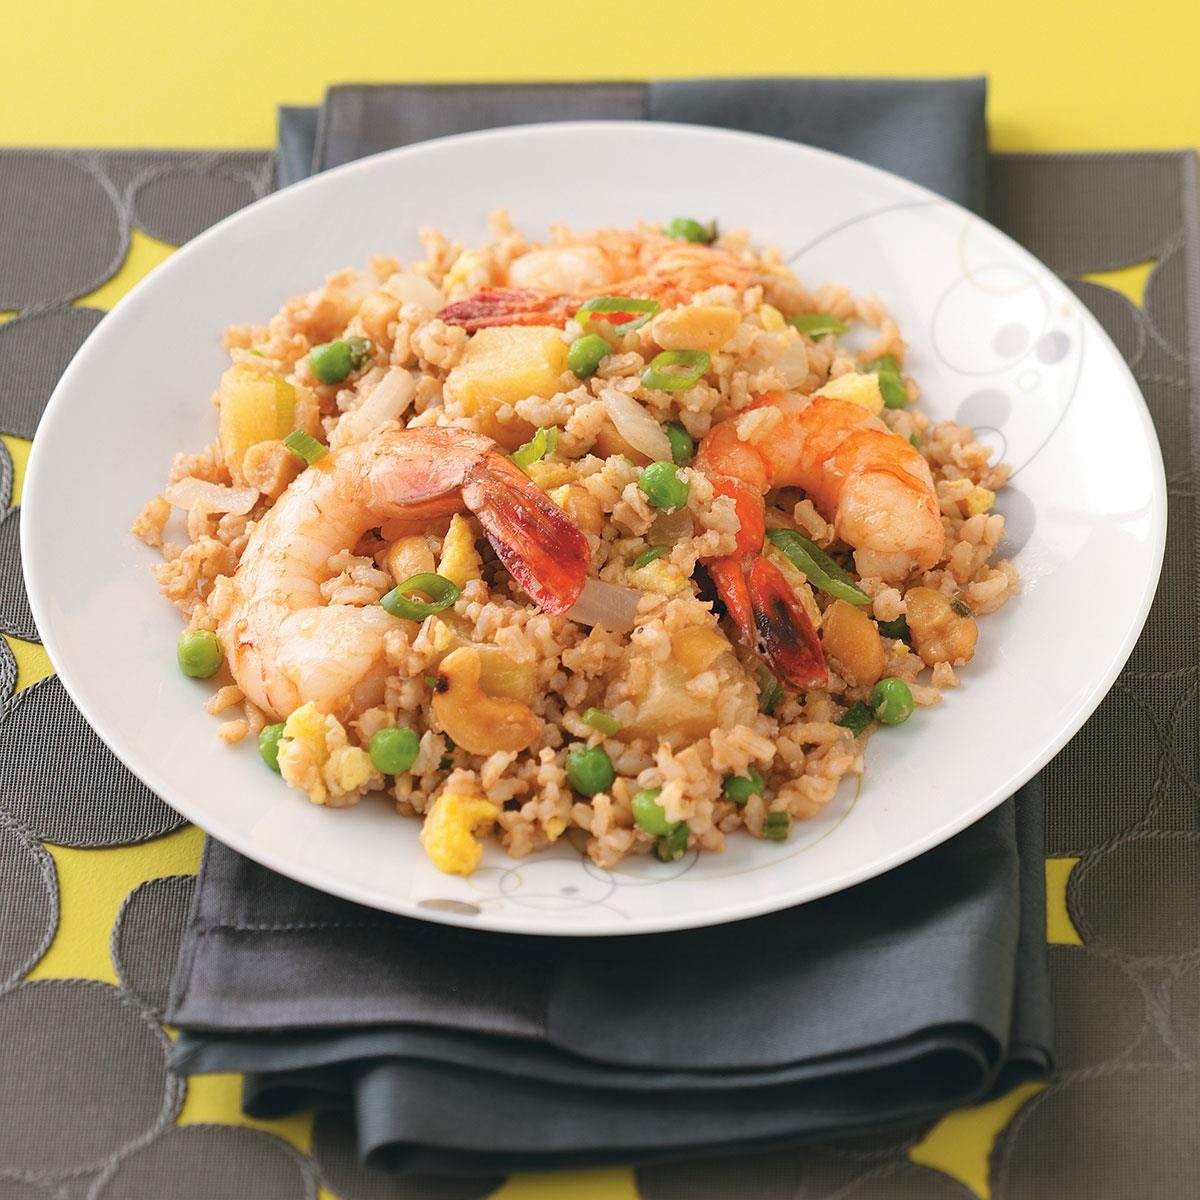 Shrimp And Pineapple Fried Rice Exps46991 Thhc1785930d33d Rms 2